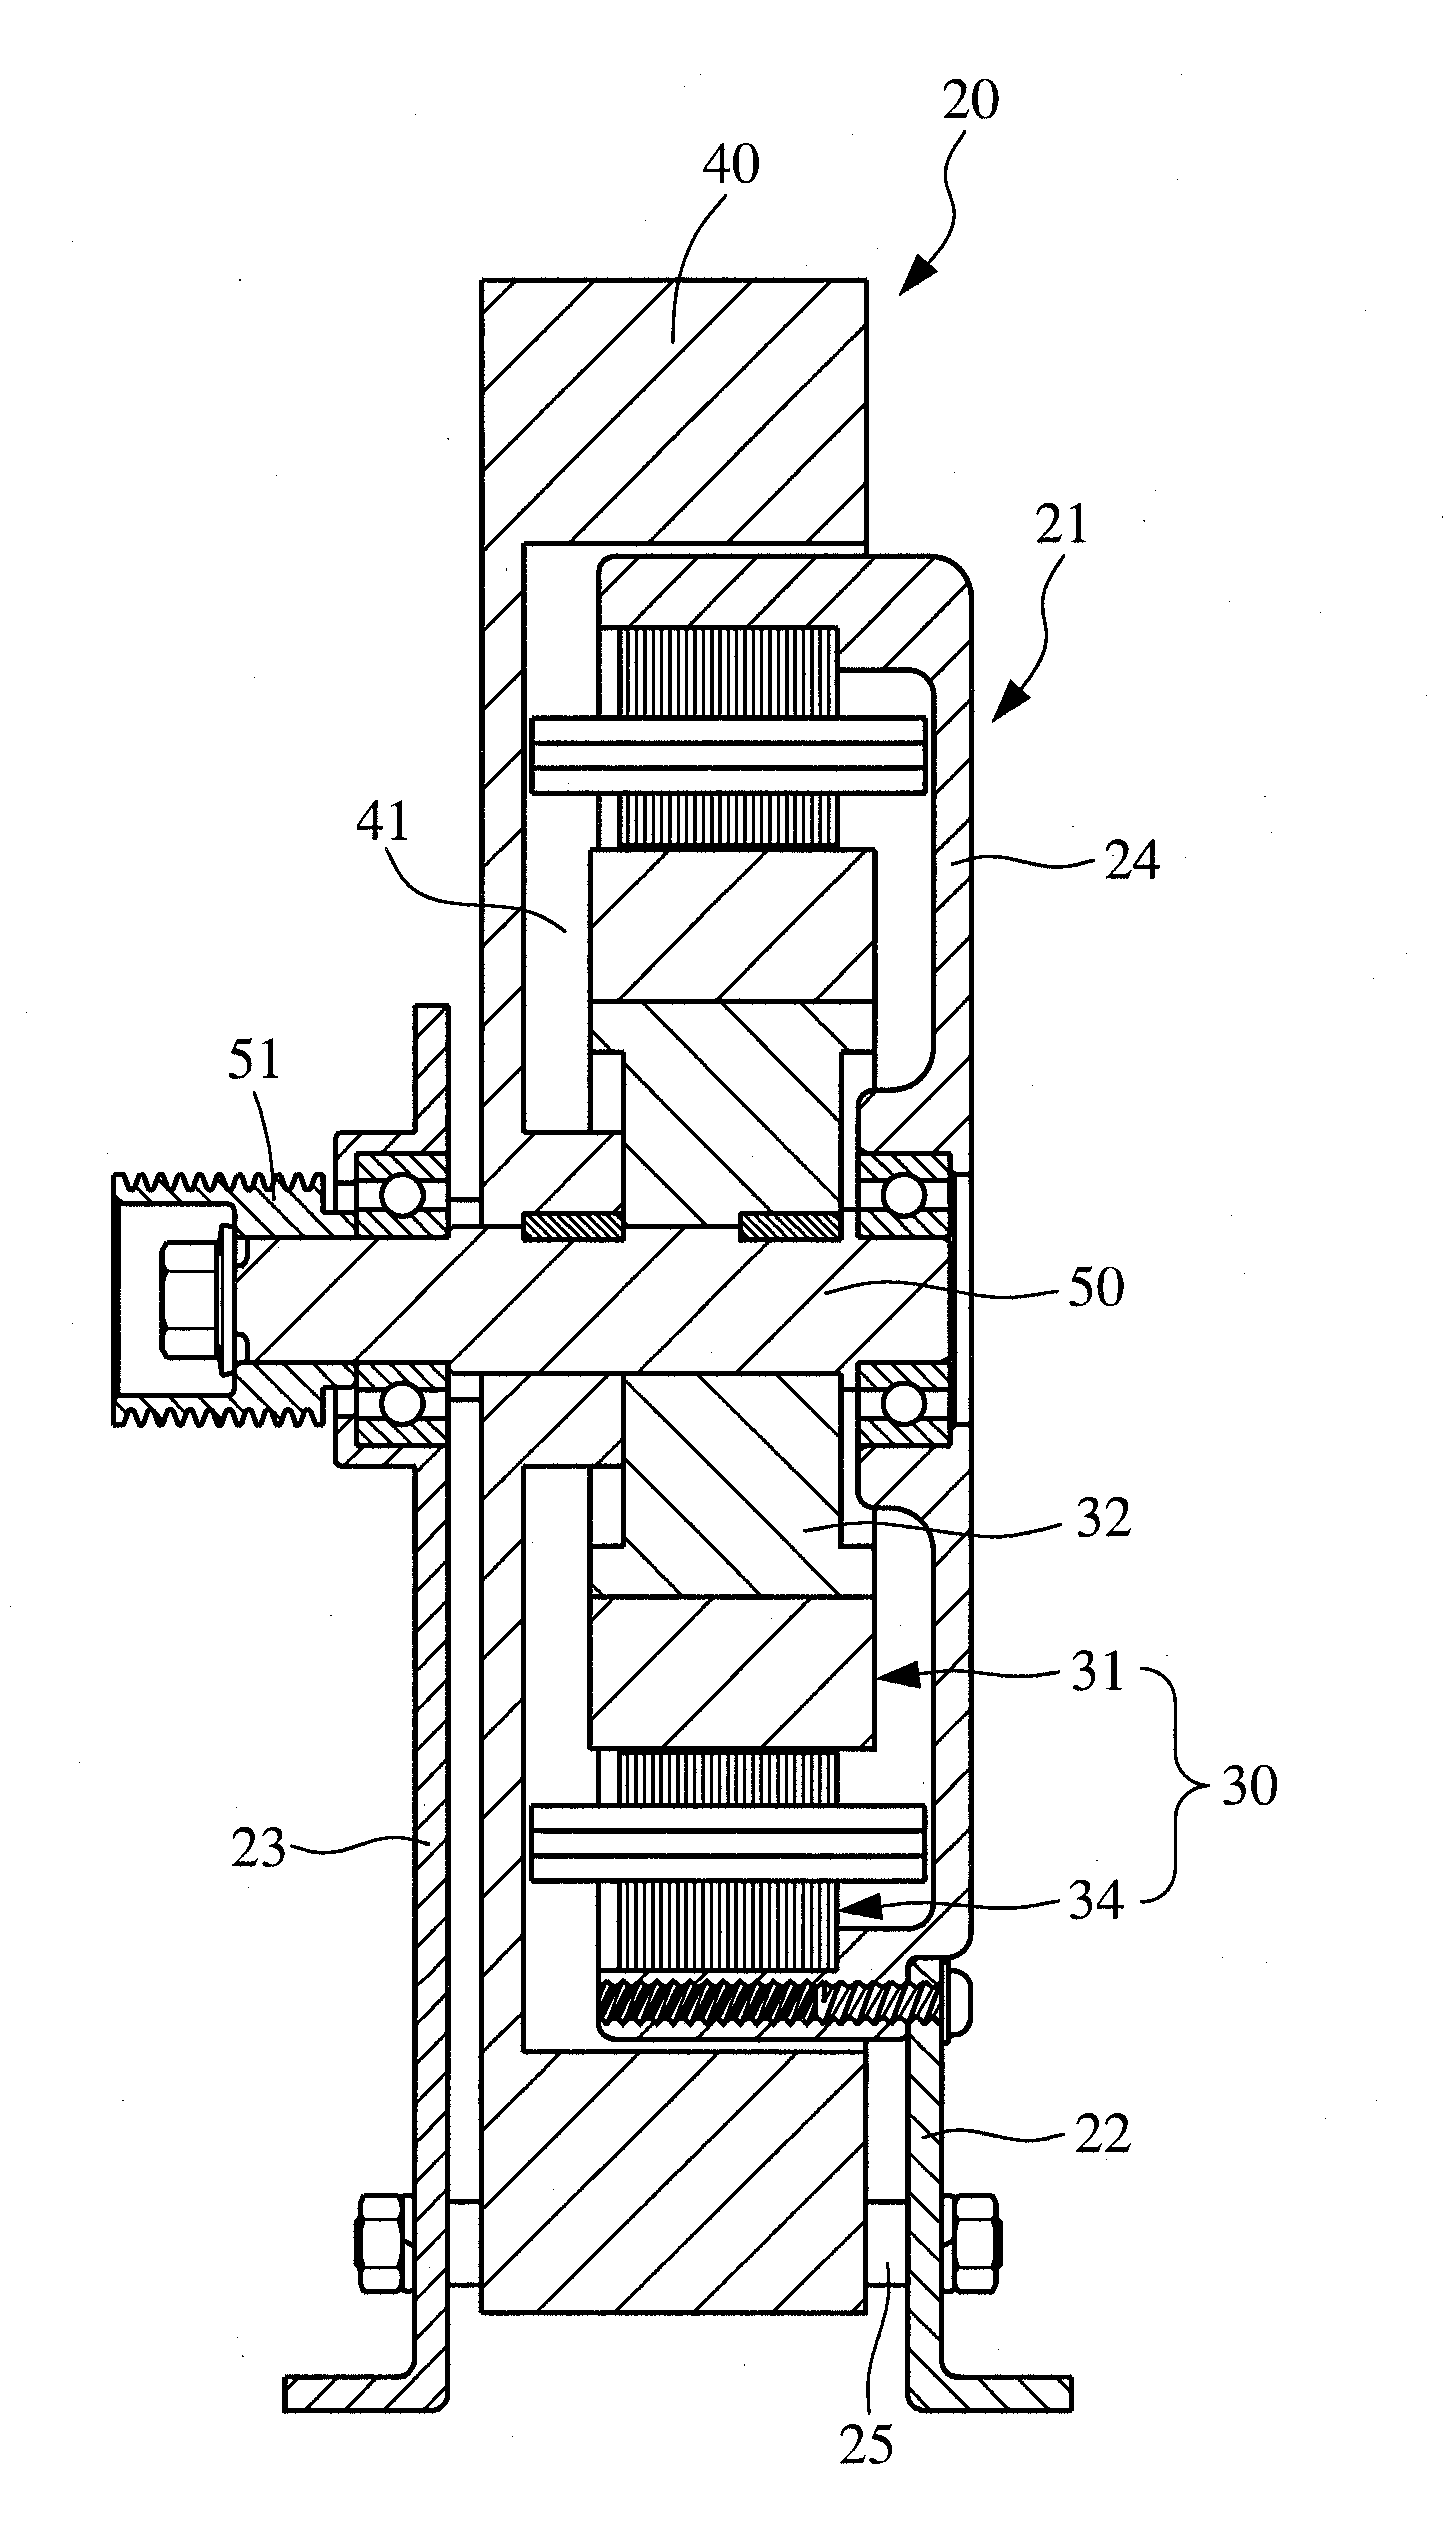 Eddy-current magnetic controlled loading device used in a magnetic controlled power generator